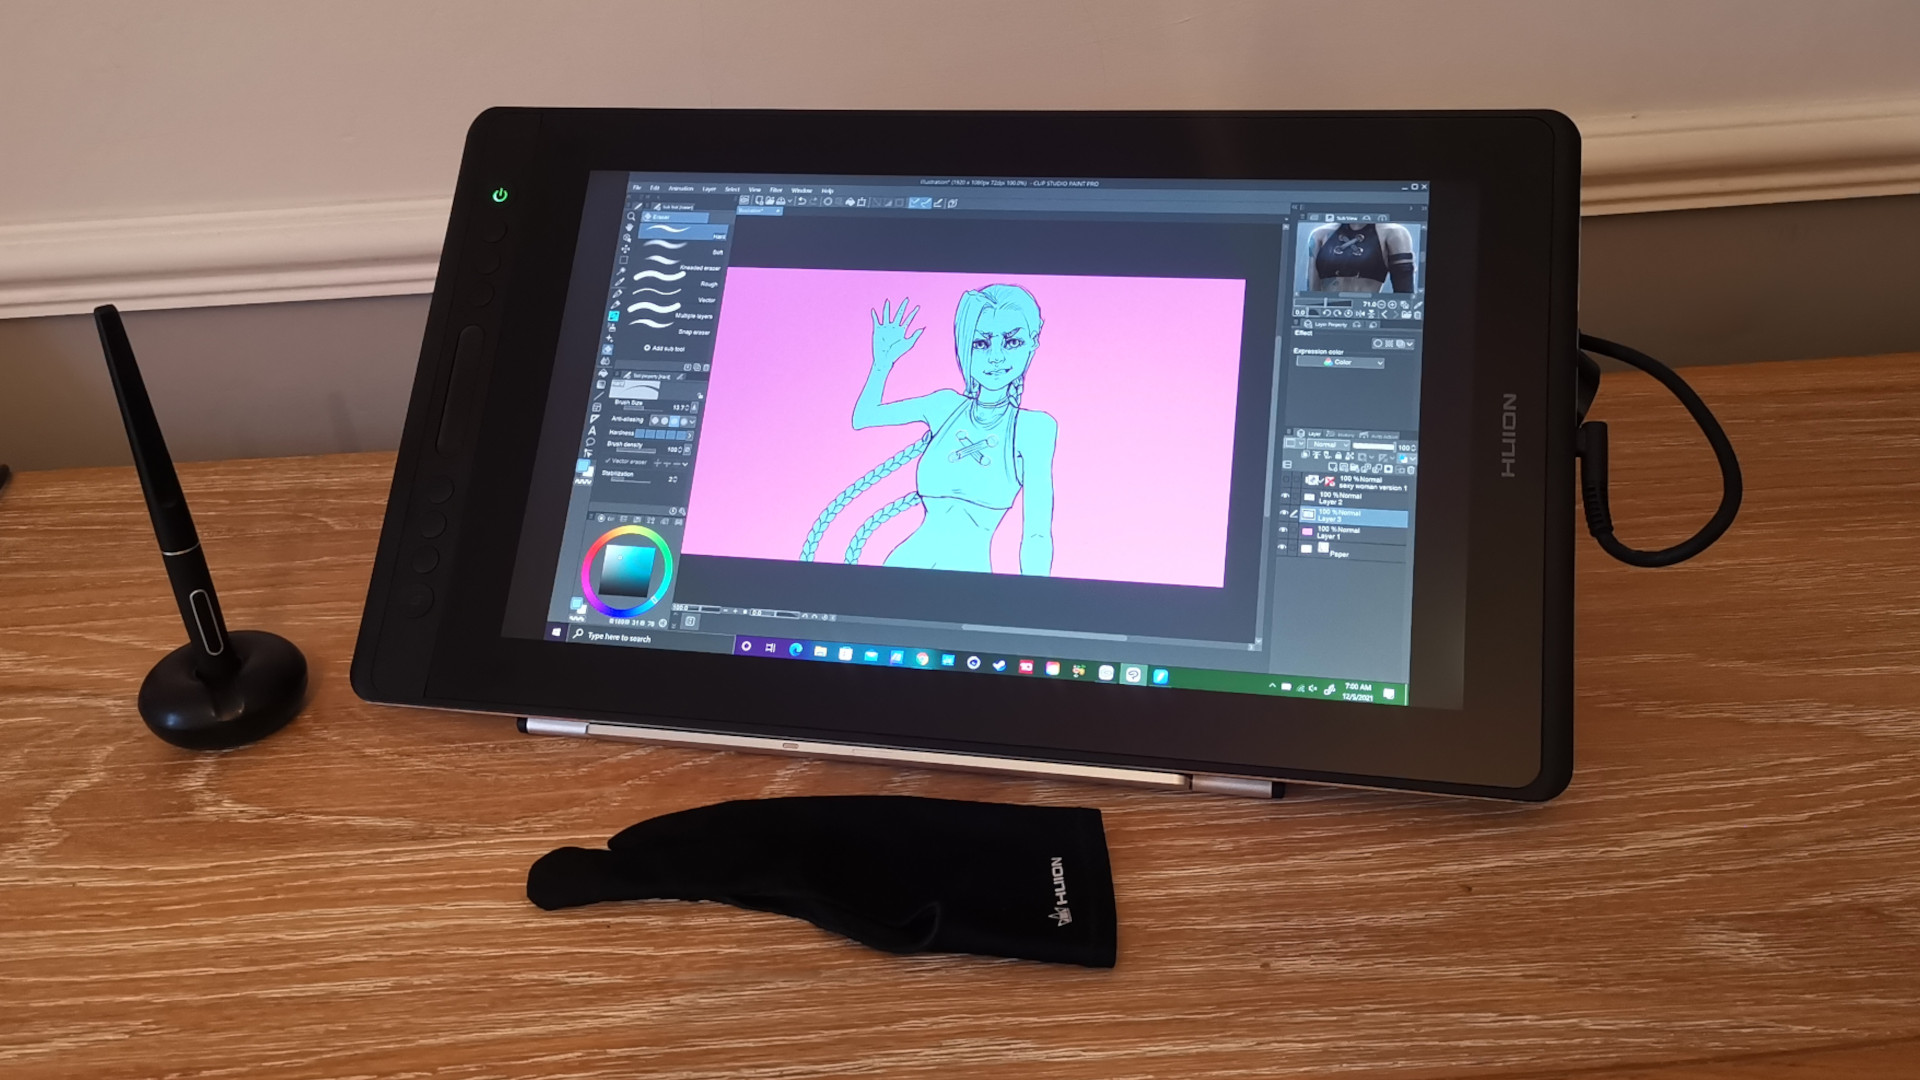 This pen display by Huion uses the new Canvas Glass